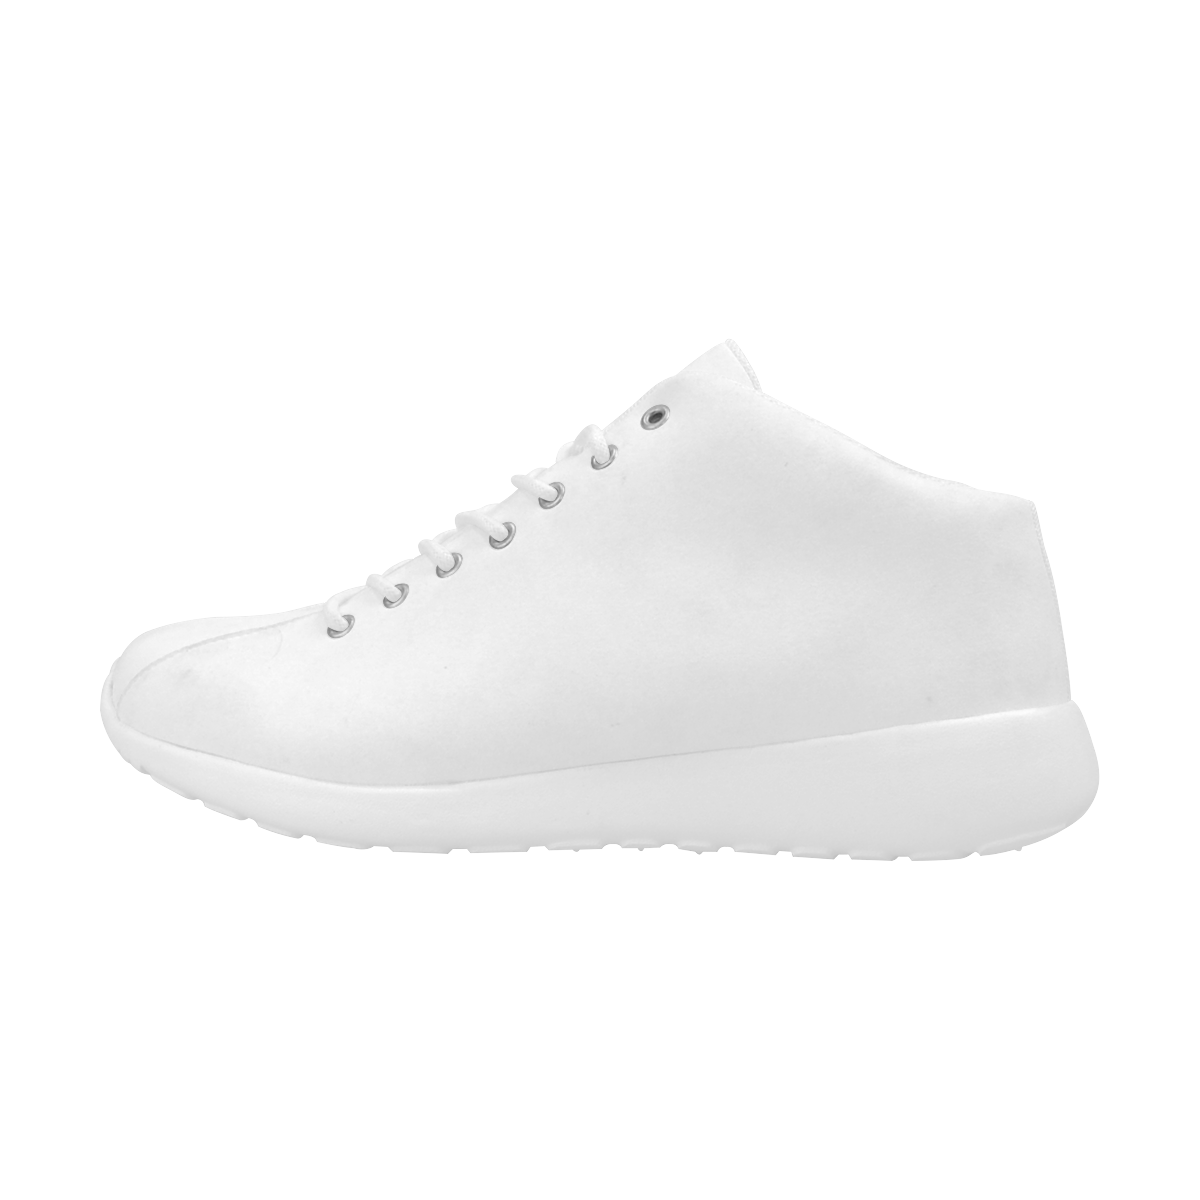 Wonderful Winter White Solid Colored Men's Basketball Training Shoes (Model 47502)